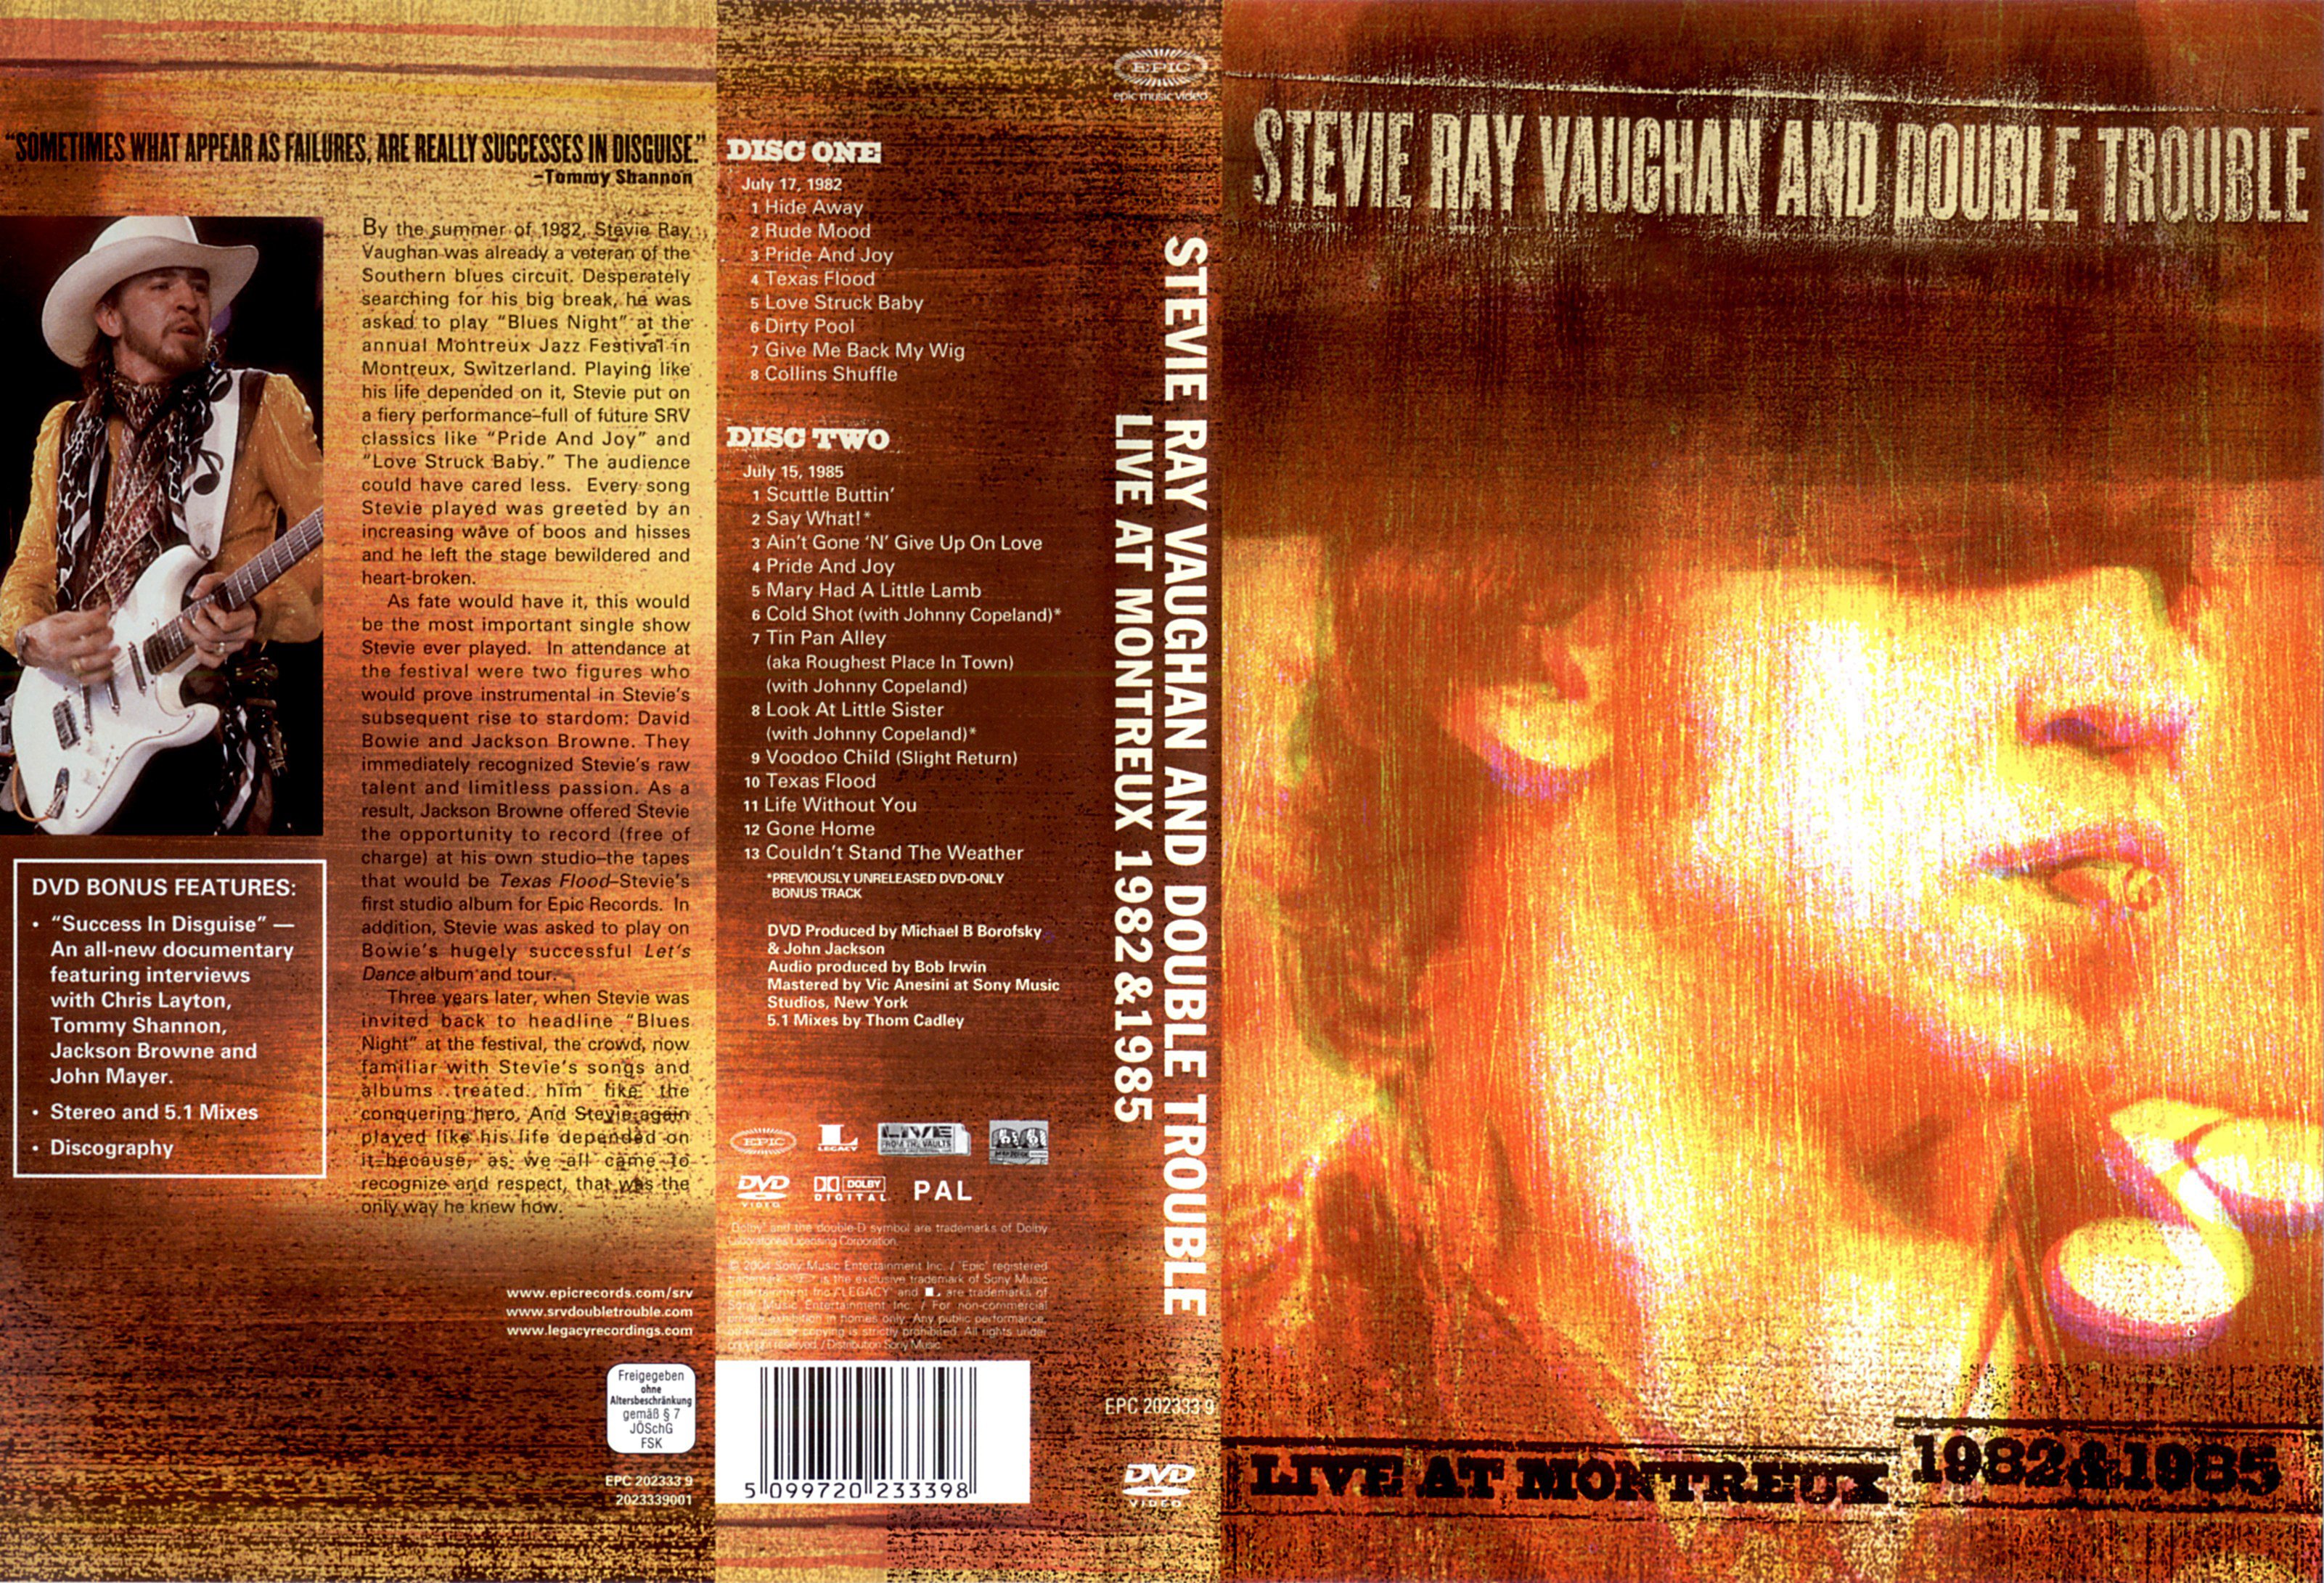 Jaquette DVD de Stevie Ray Vaughan and double trouble - Live at